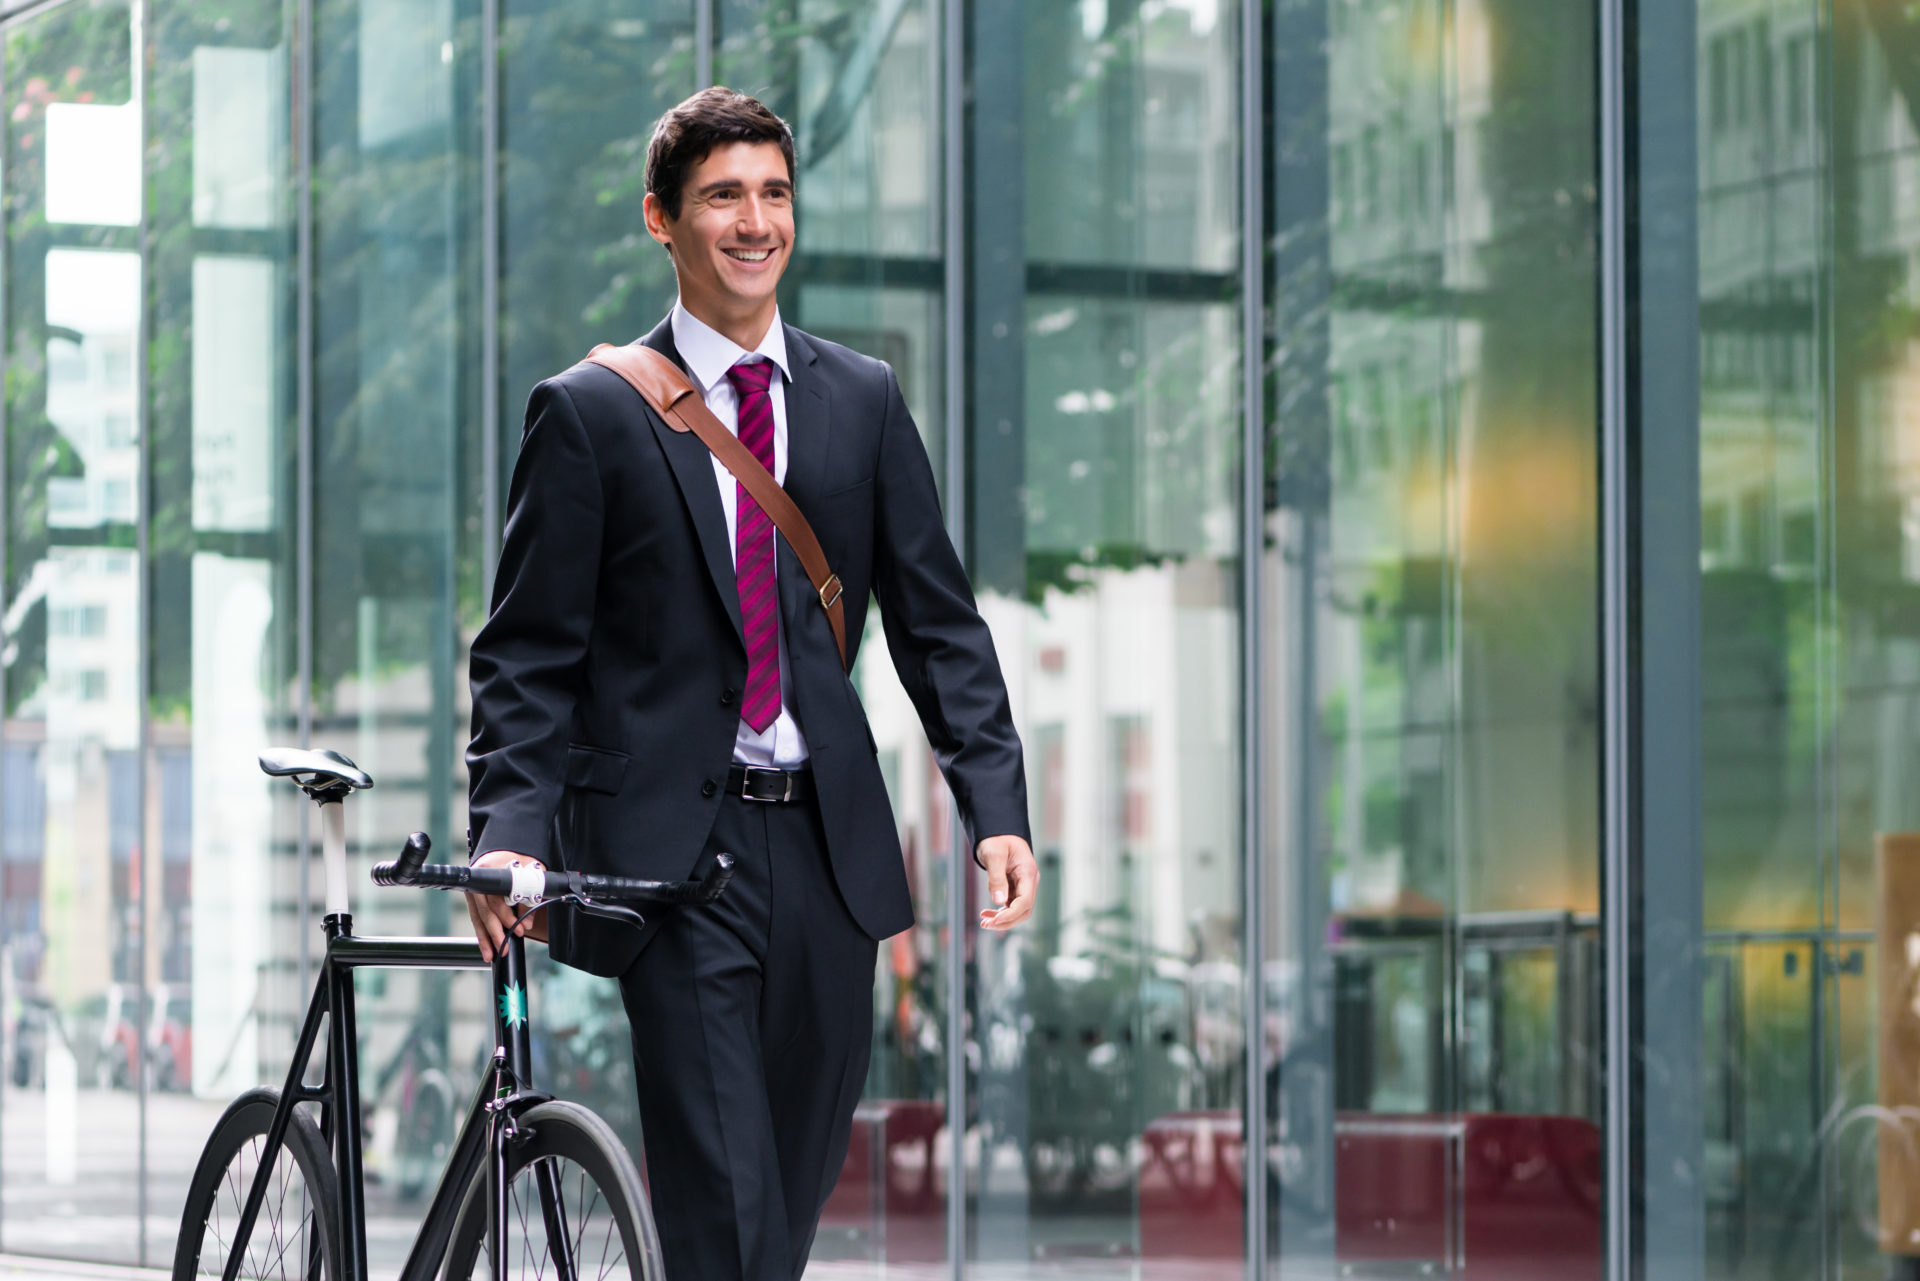 Man in suit holding bike